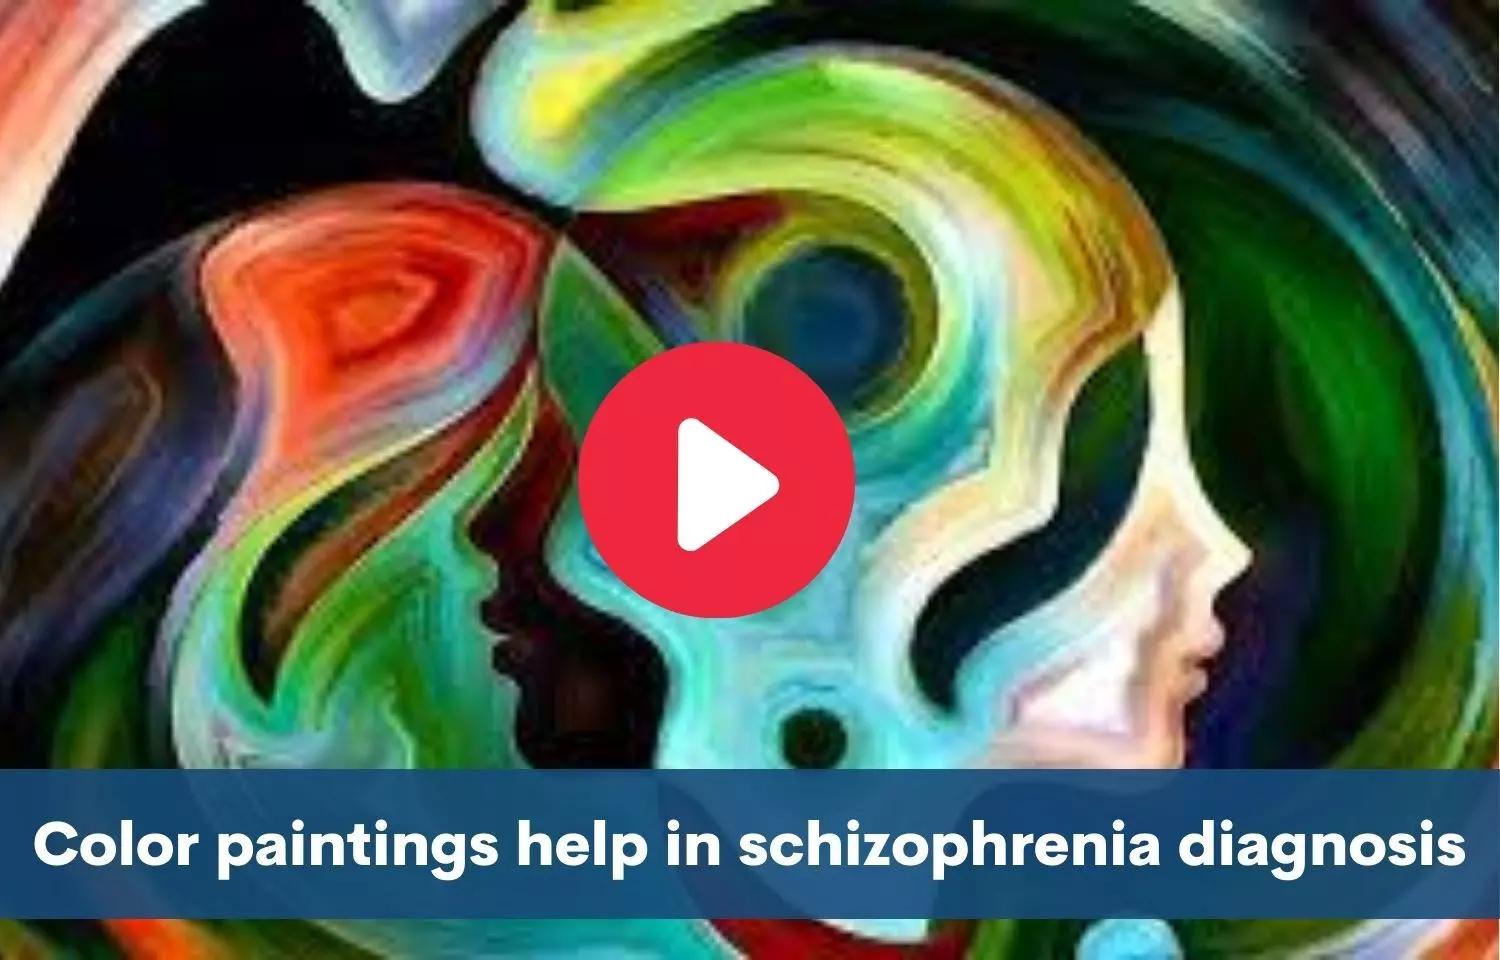 Color painting based paradigm helps predict schizophrenia severity